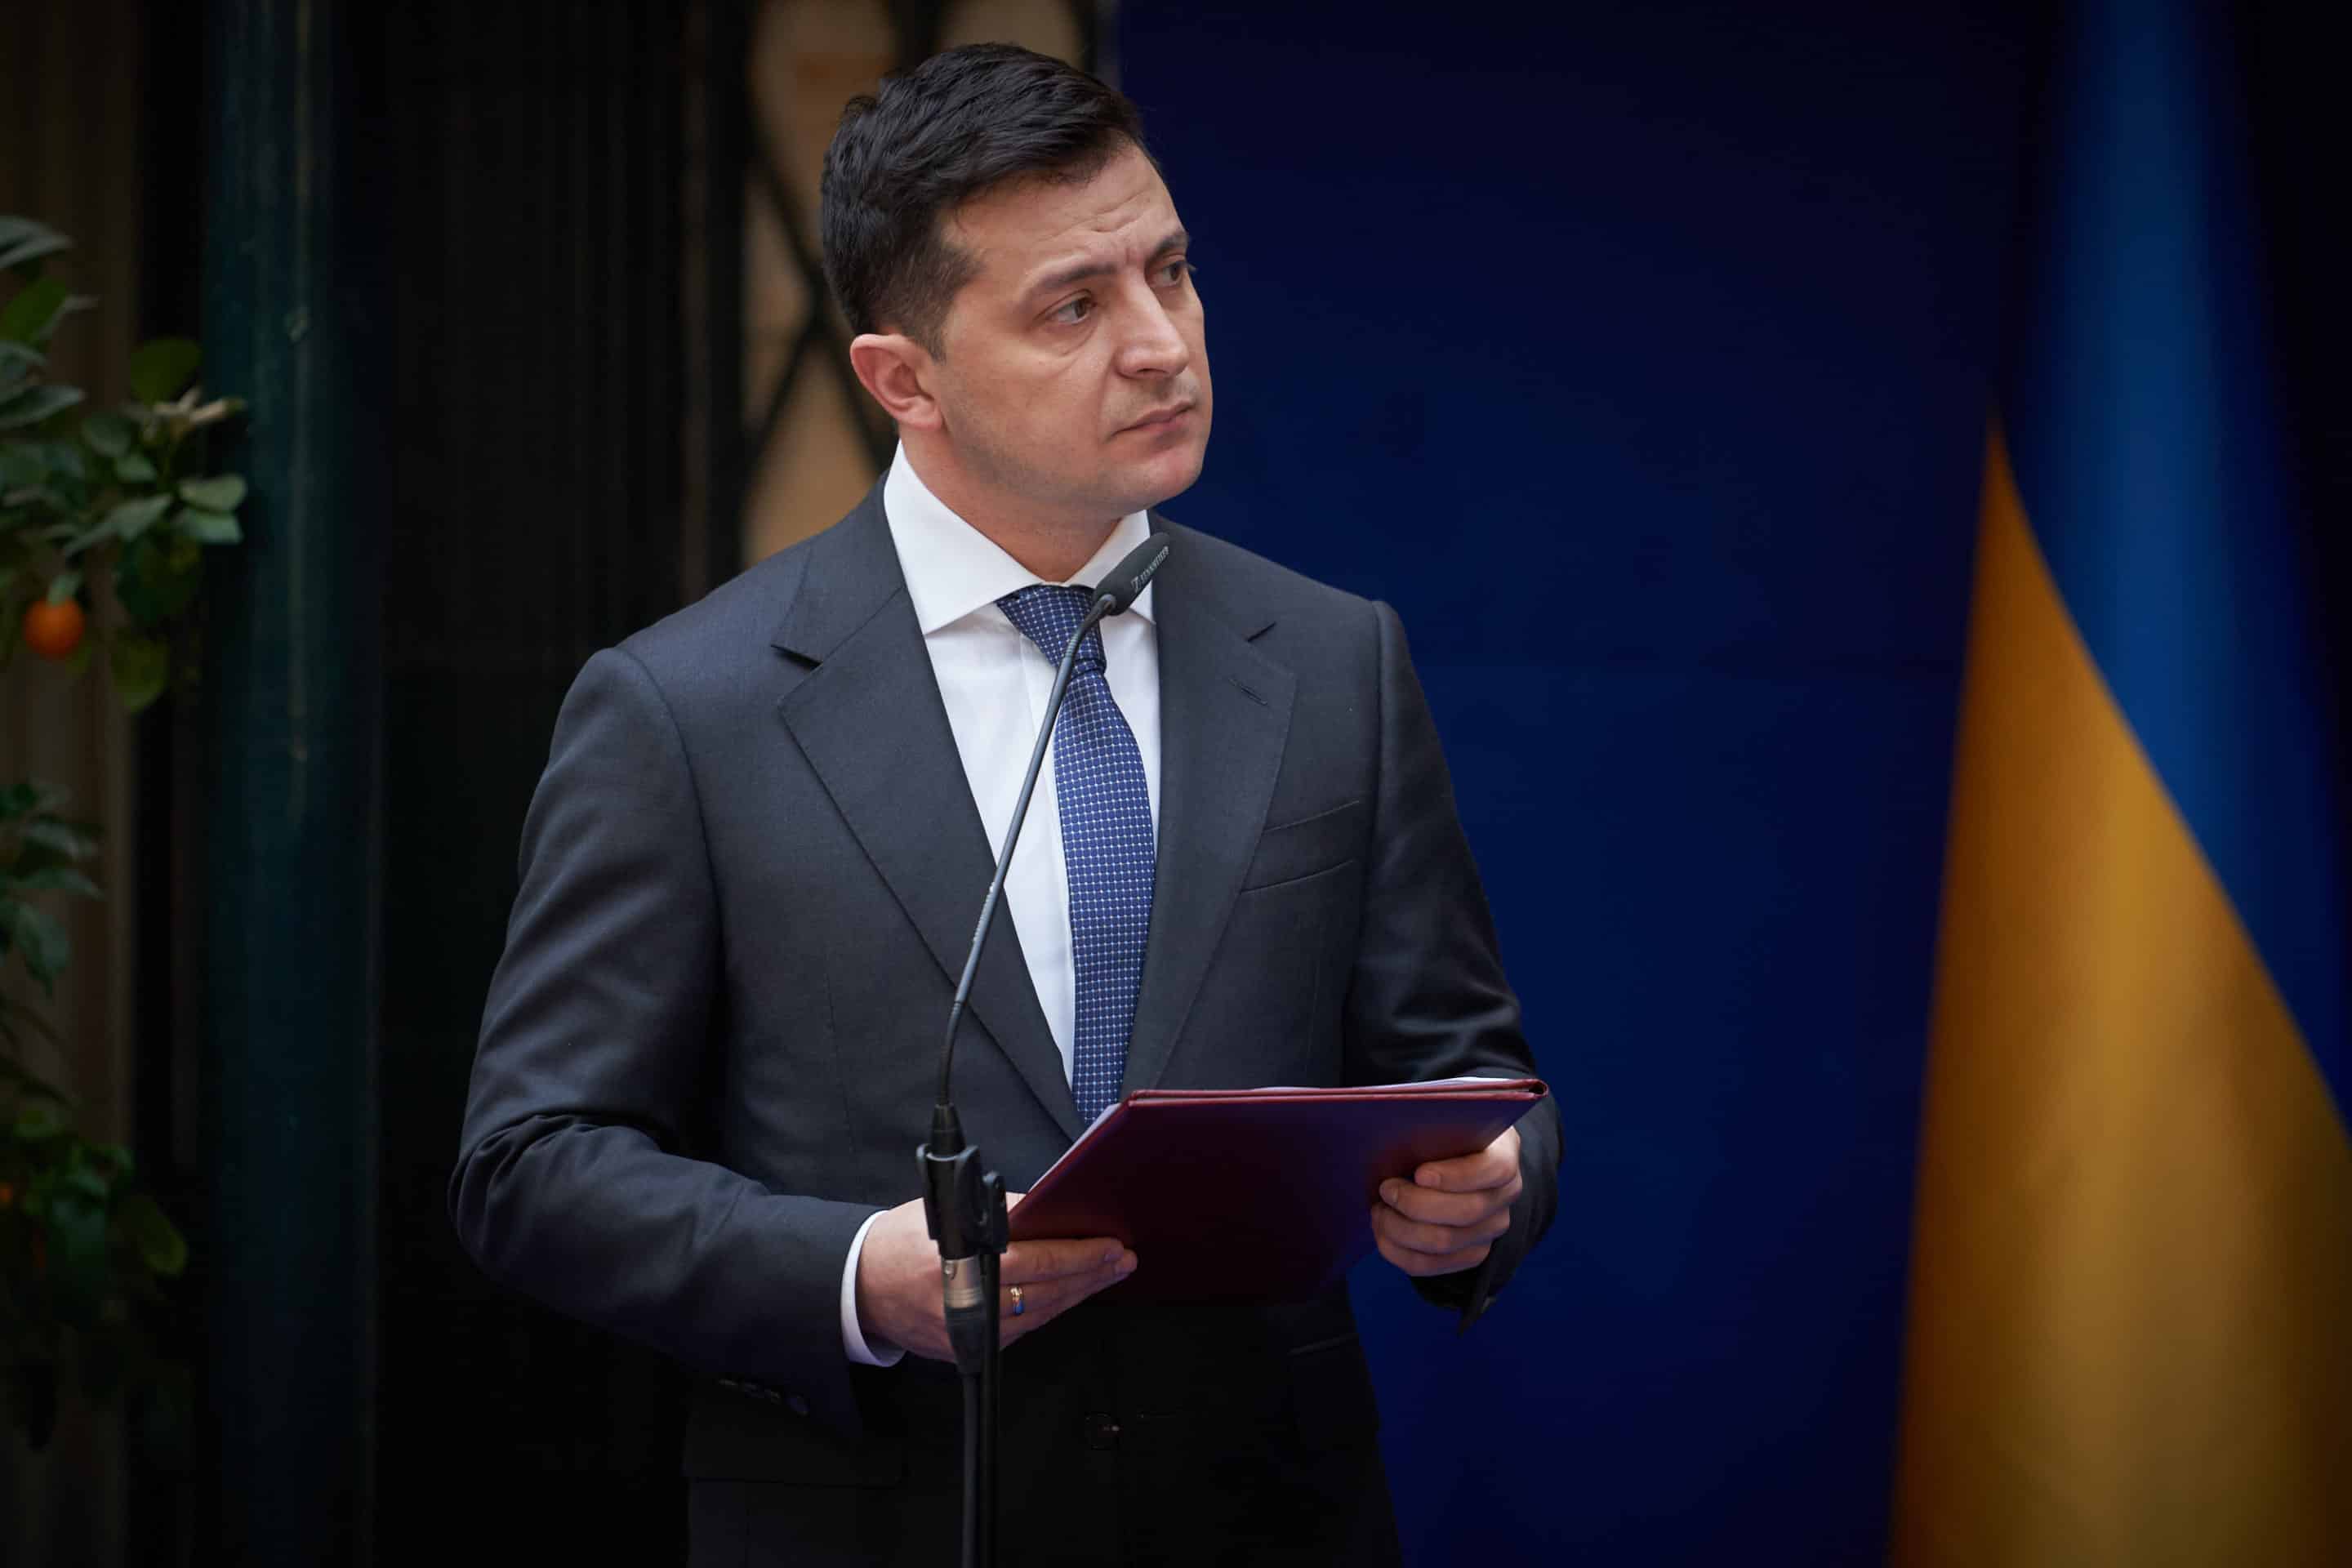 volodymyr zelensky in a working visit to the state of israel, january 2020. xiv